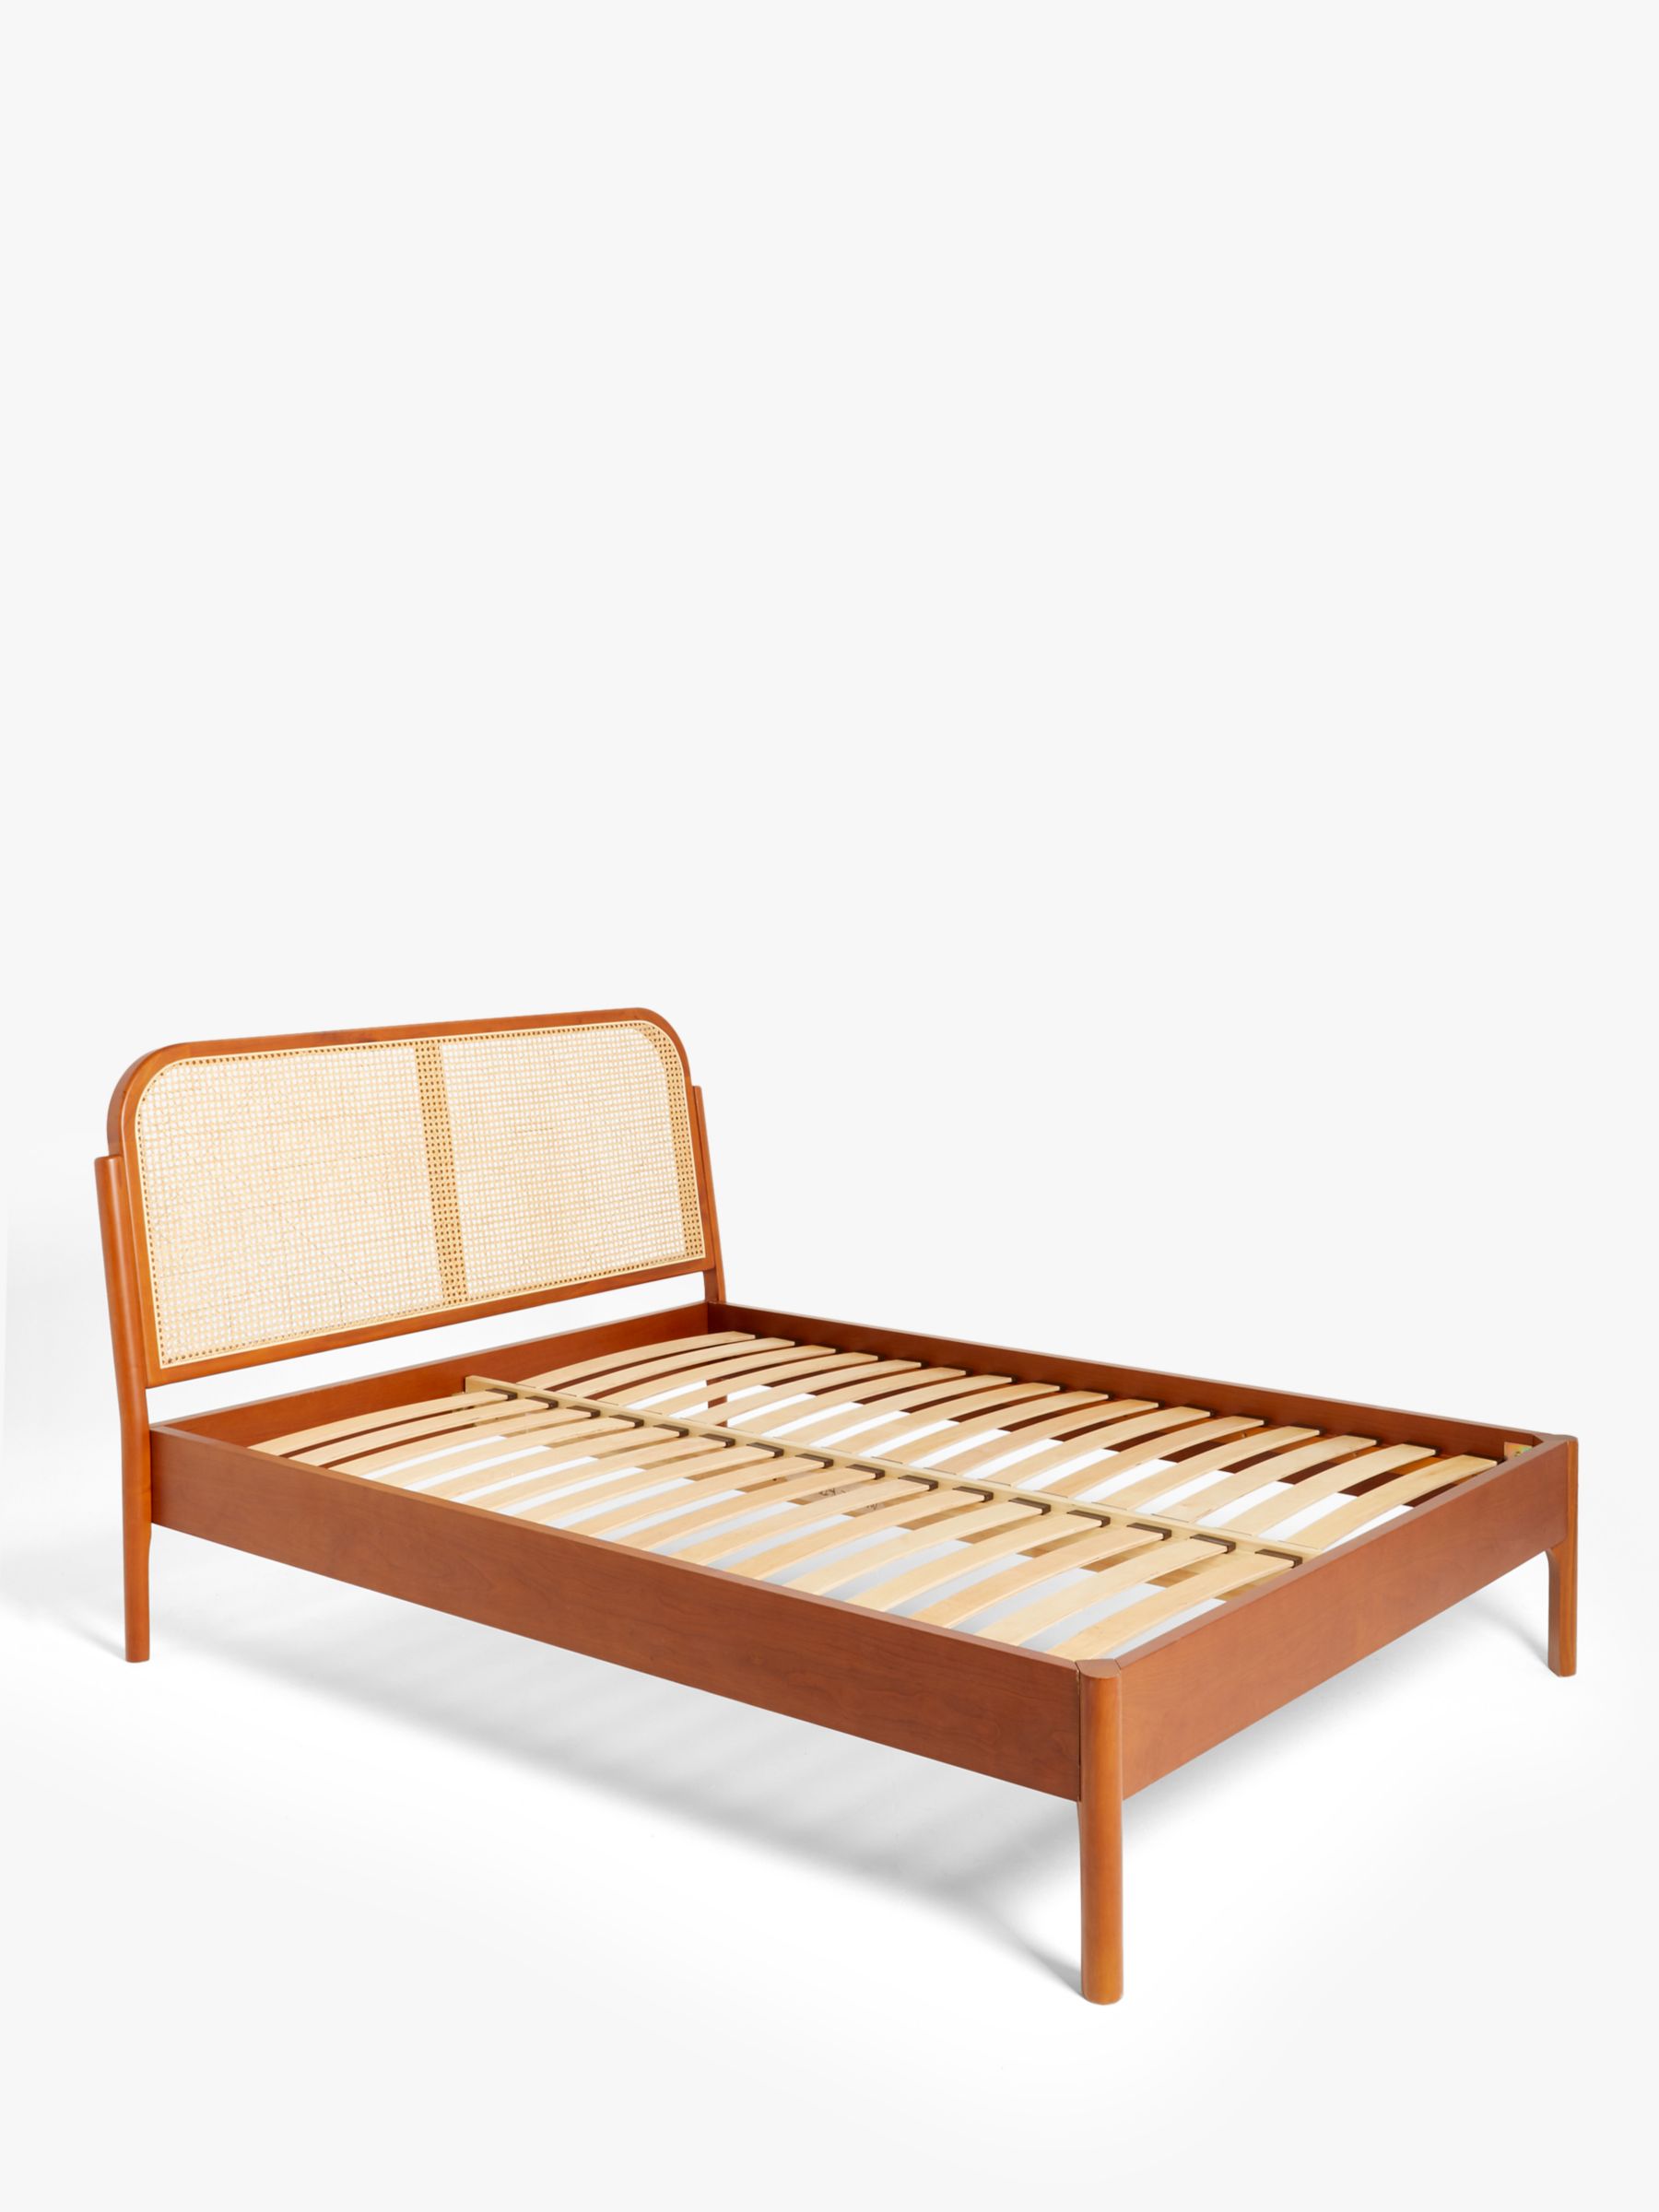 Photo of John lewis rattan cherry wood bed frame king size brown